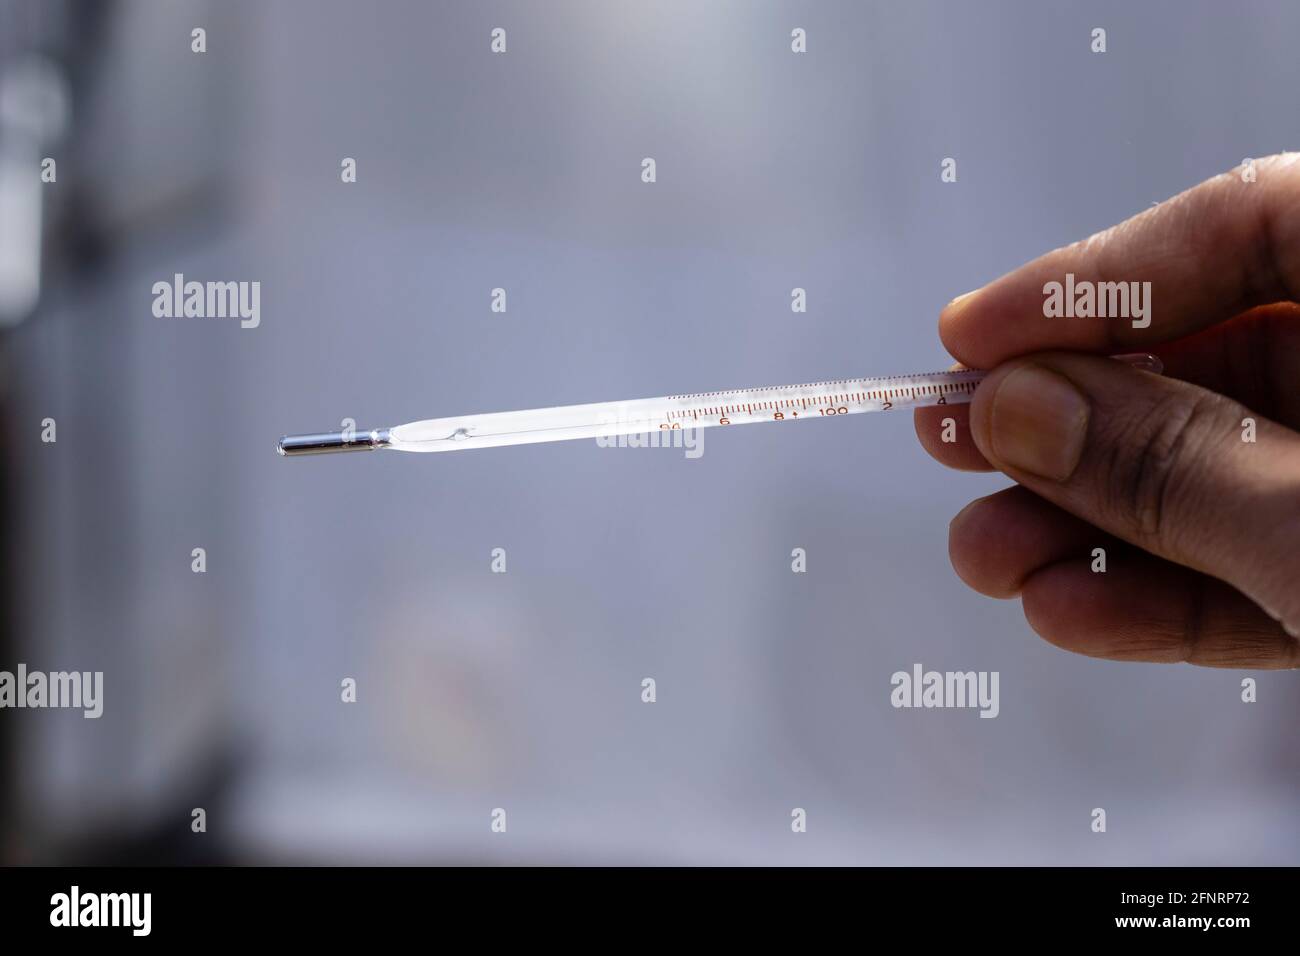 Selective focus on an analog thermometer held in human hand Stock Photo